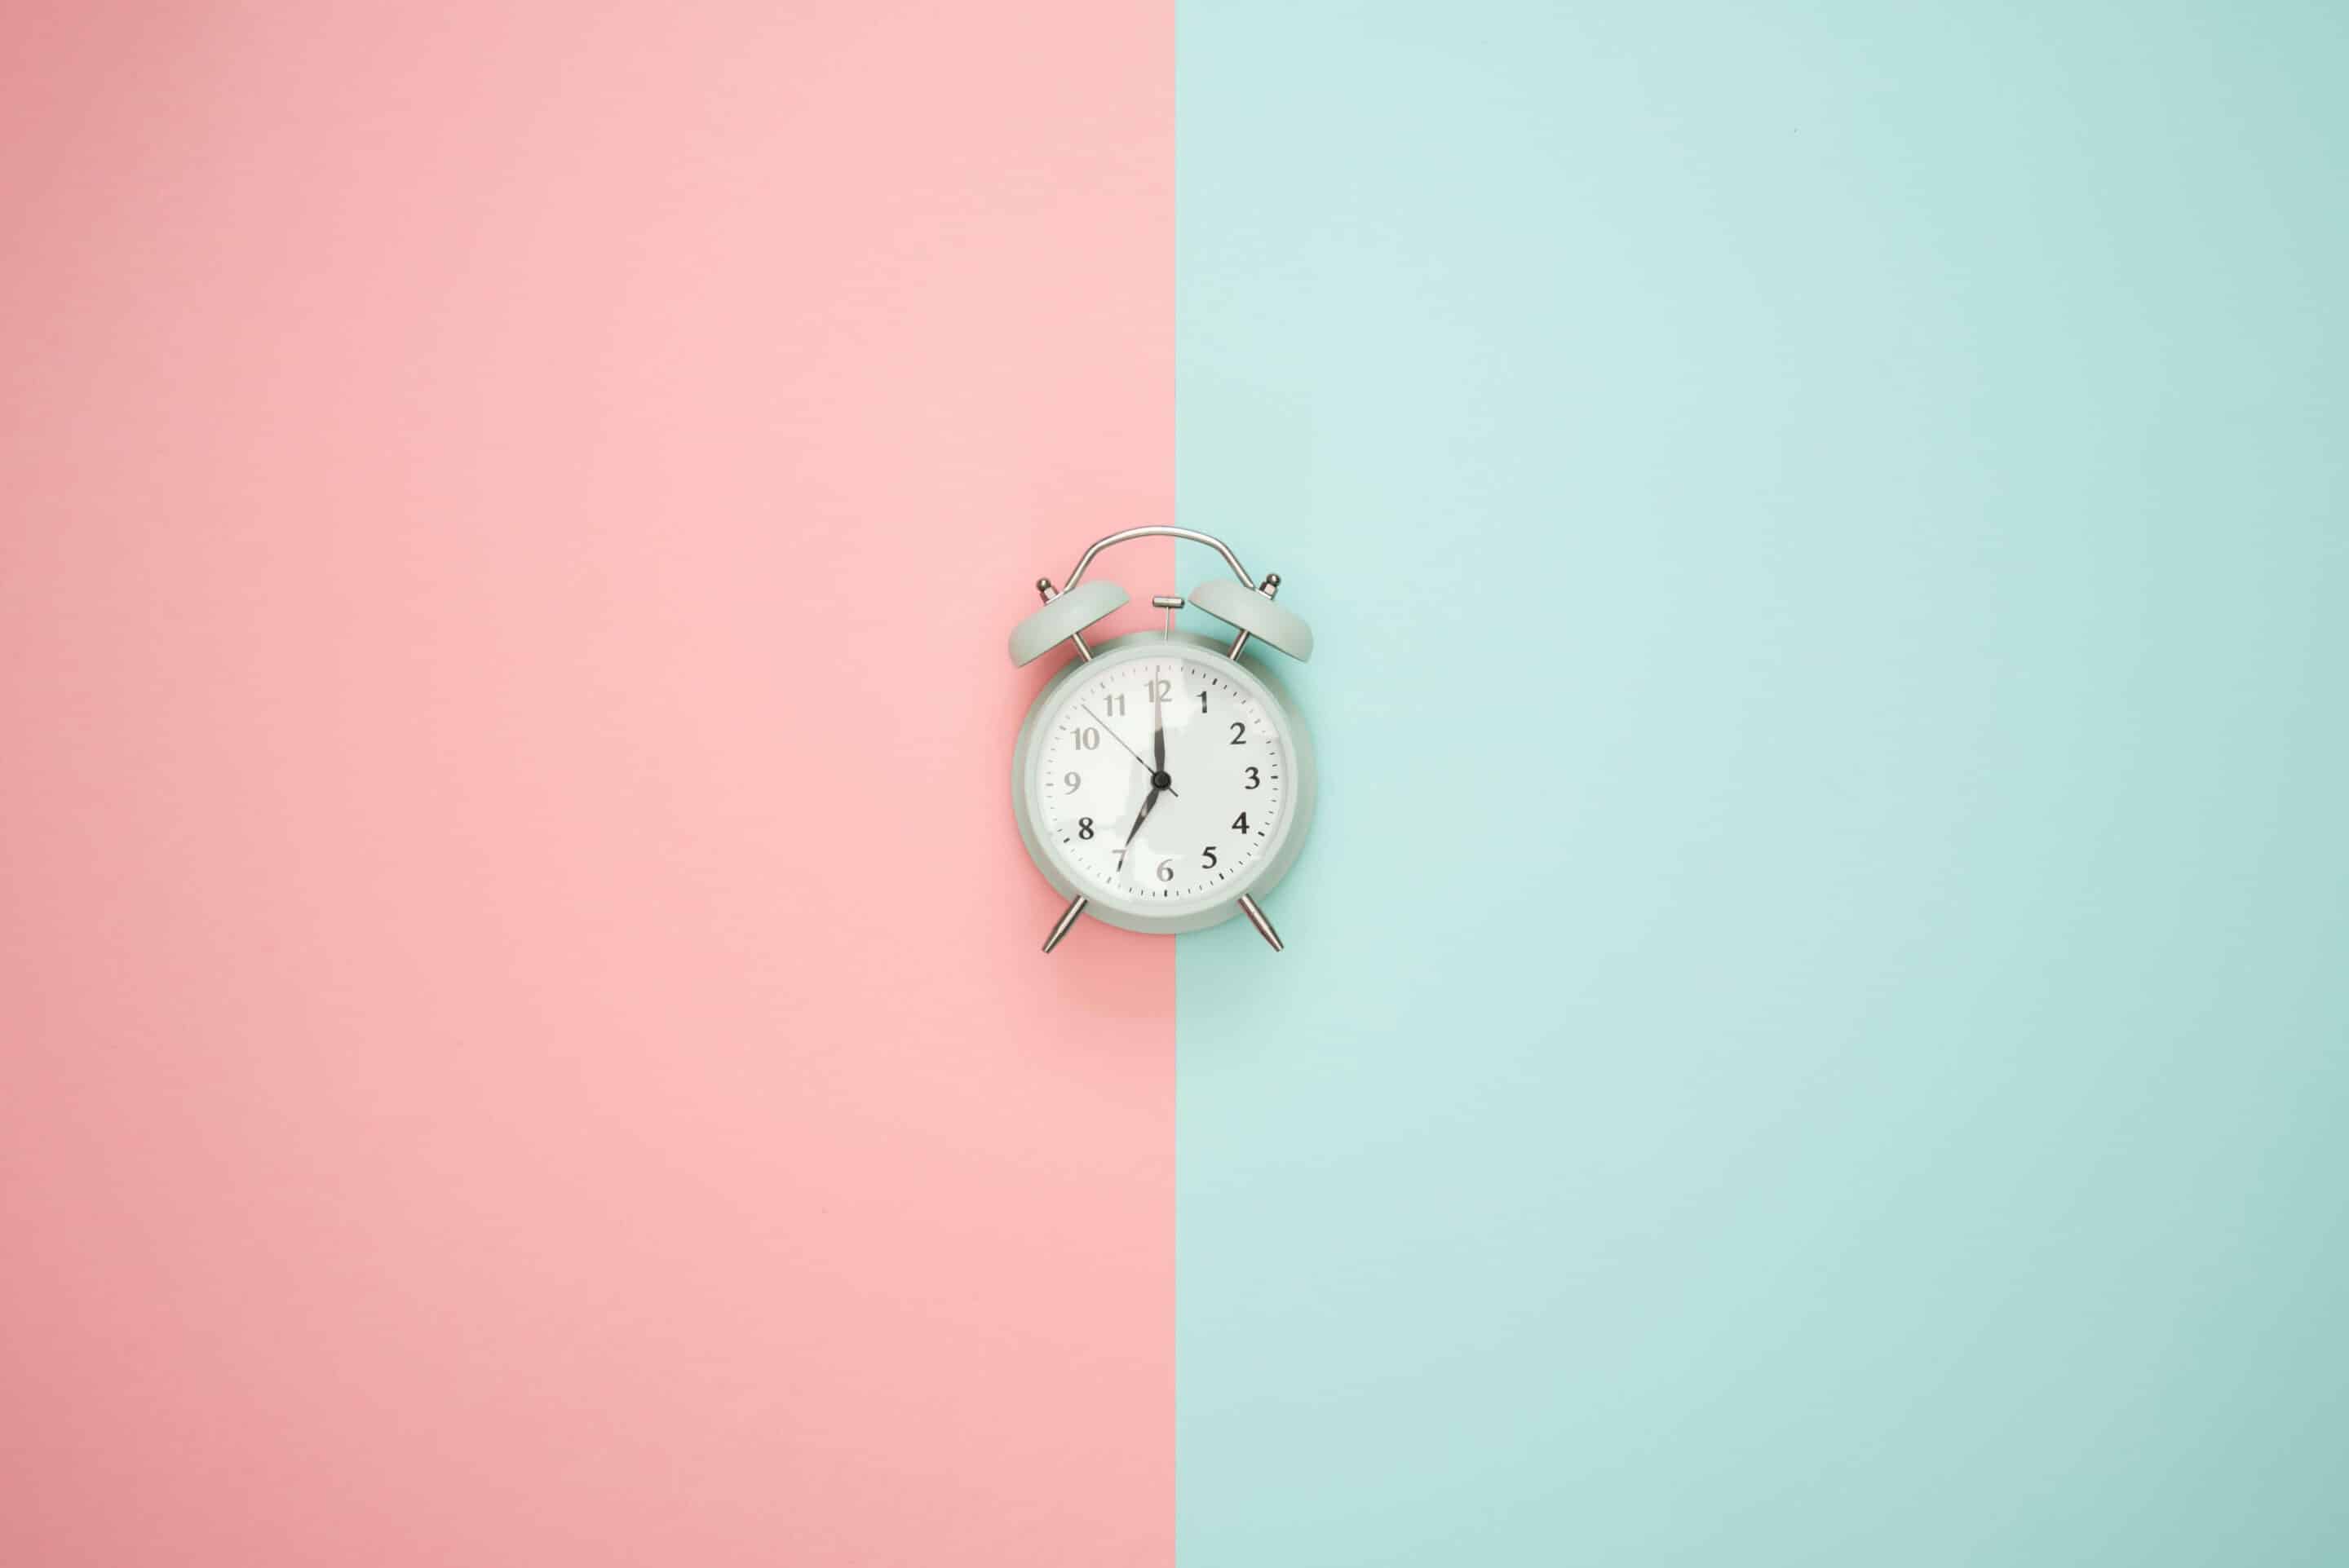 Why you should stop rushing your agents over average handling time